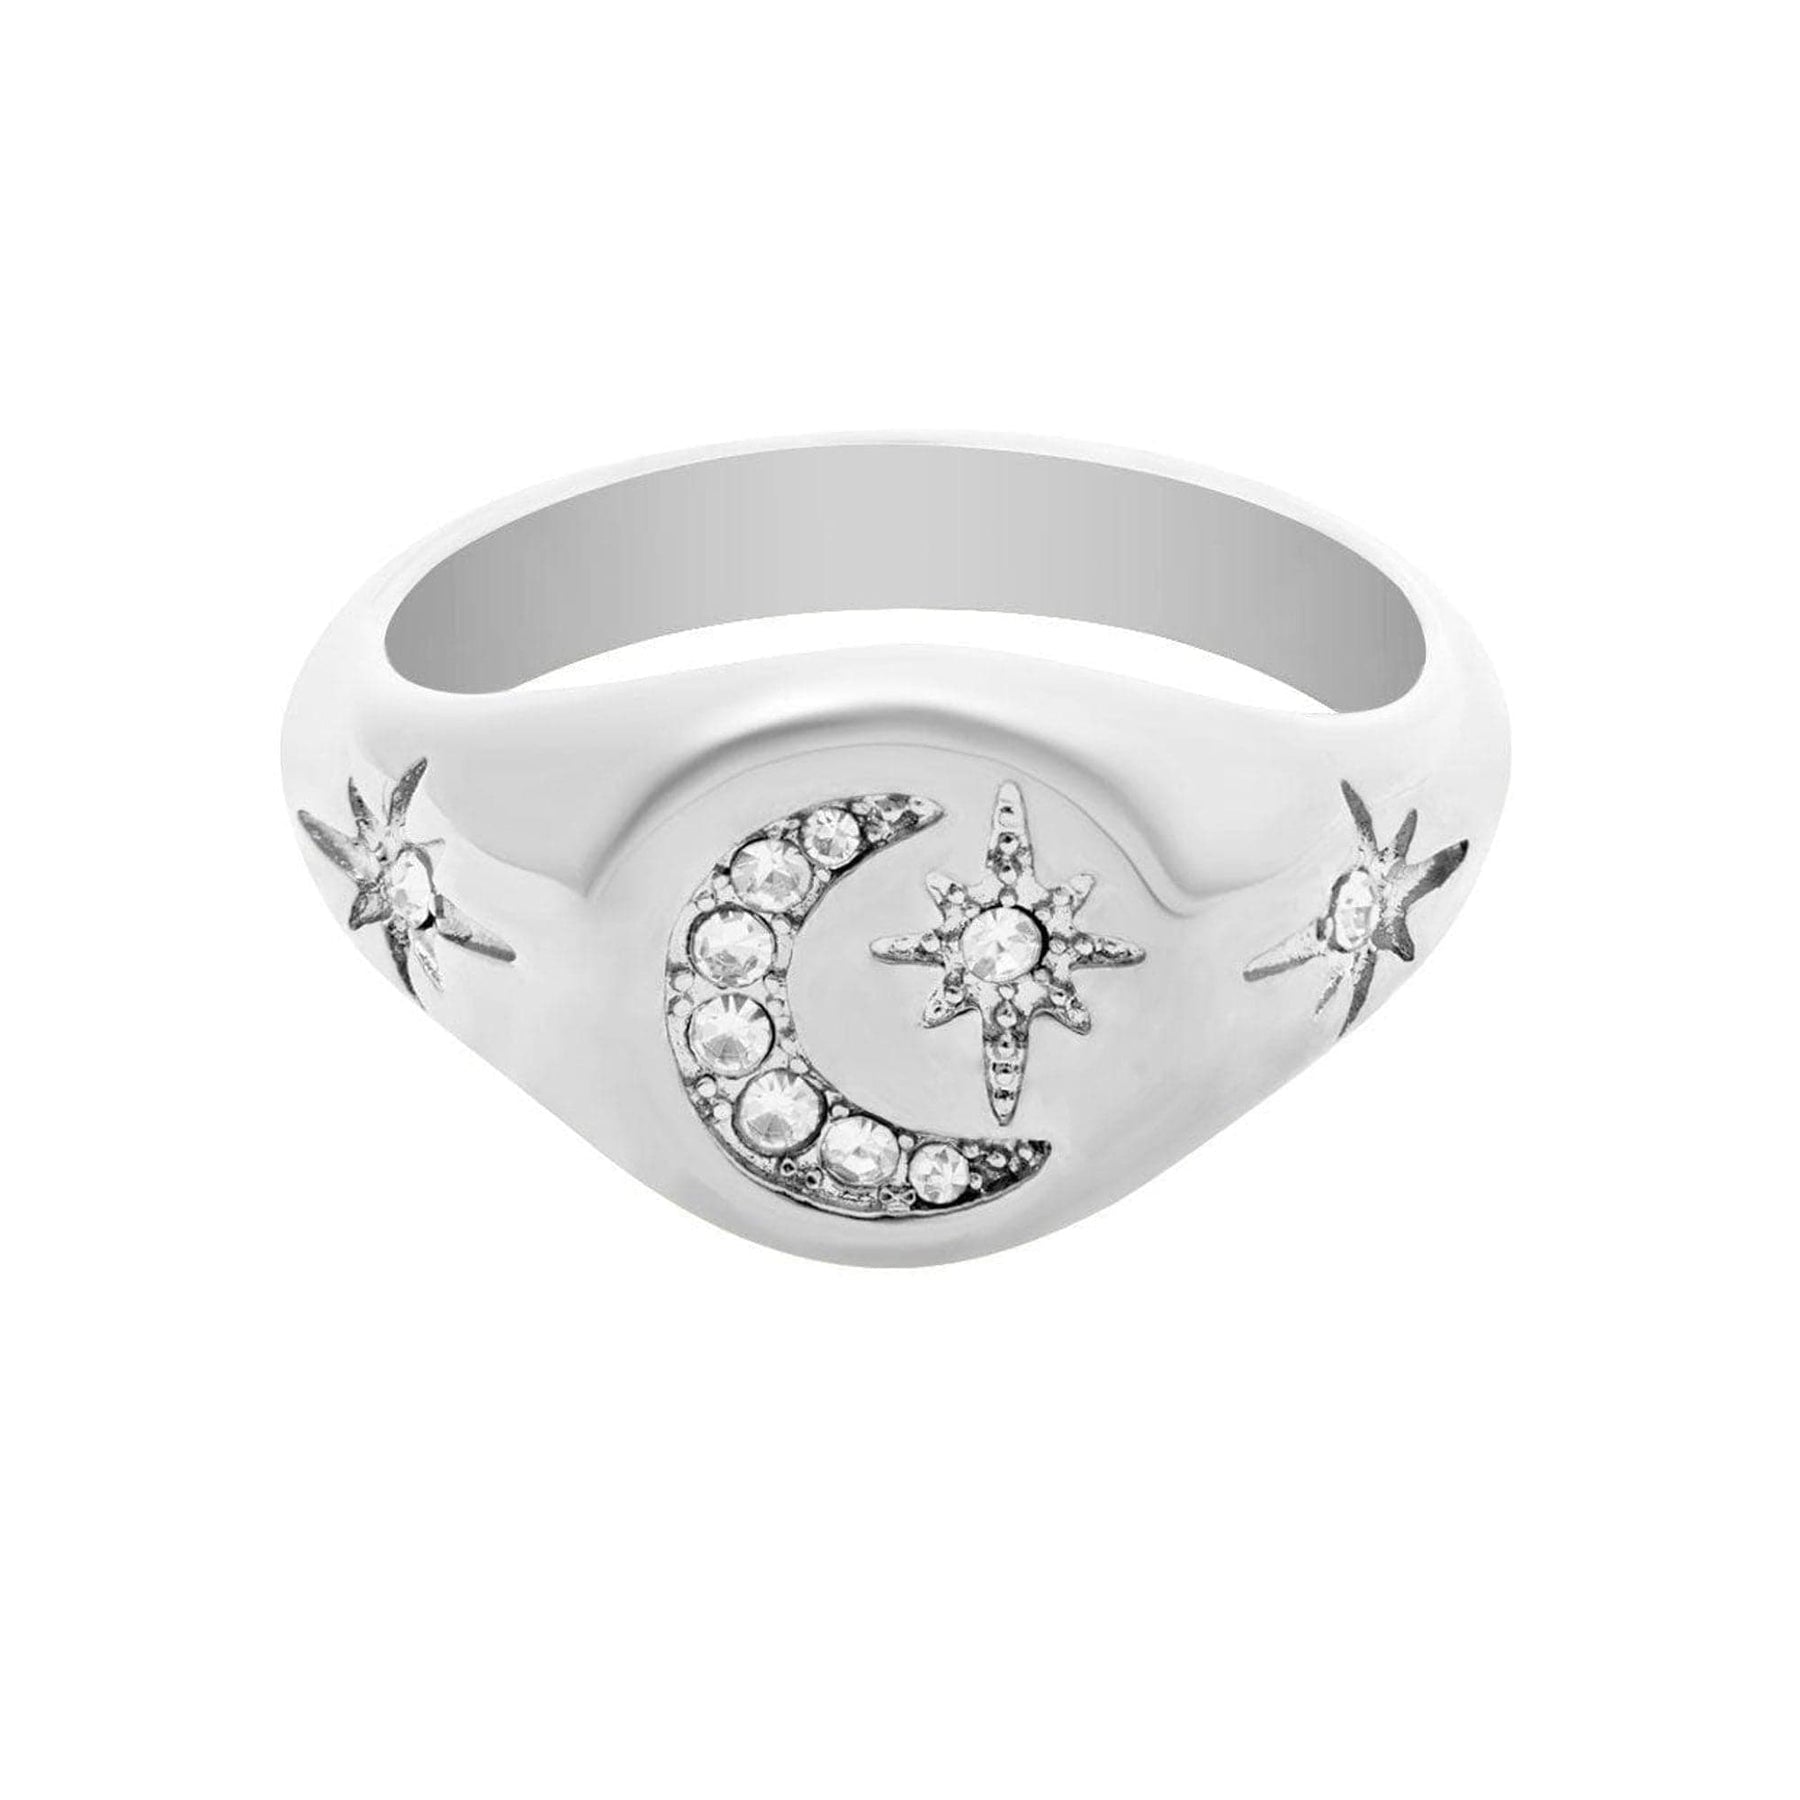 BohoMoon Stainless Steel Luna Signet Ring Silver / US 6 / UK L / EUR 51 (small)